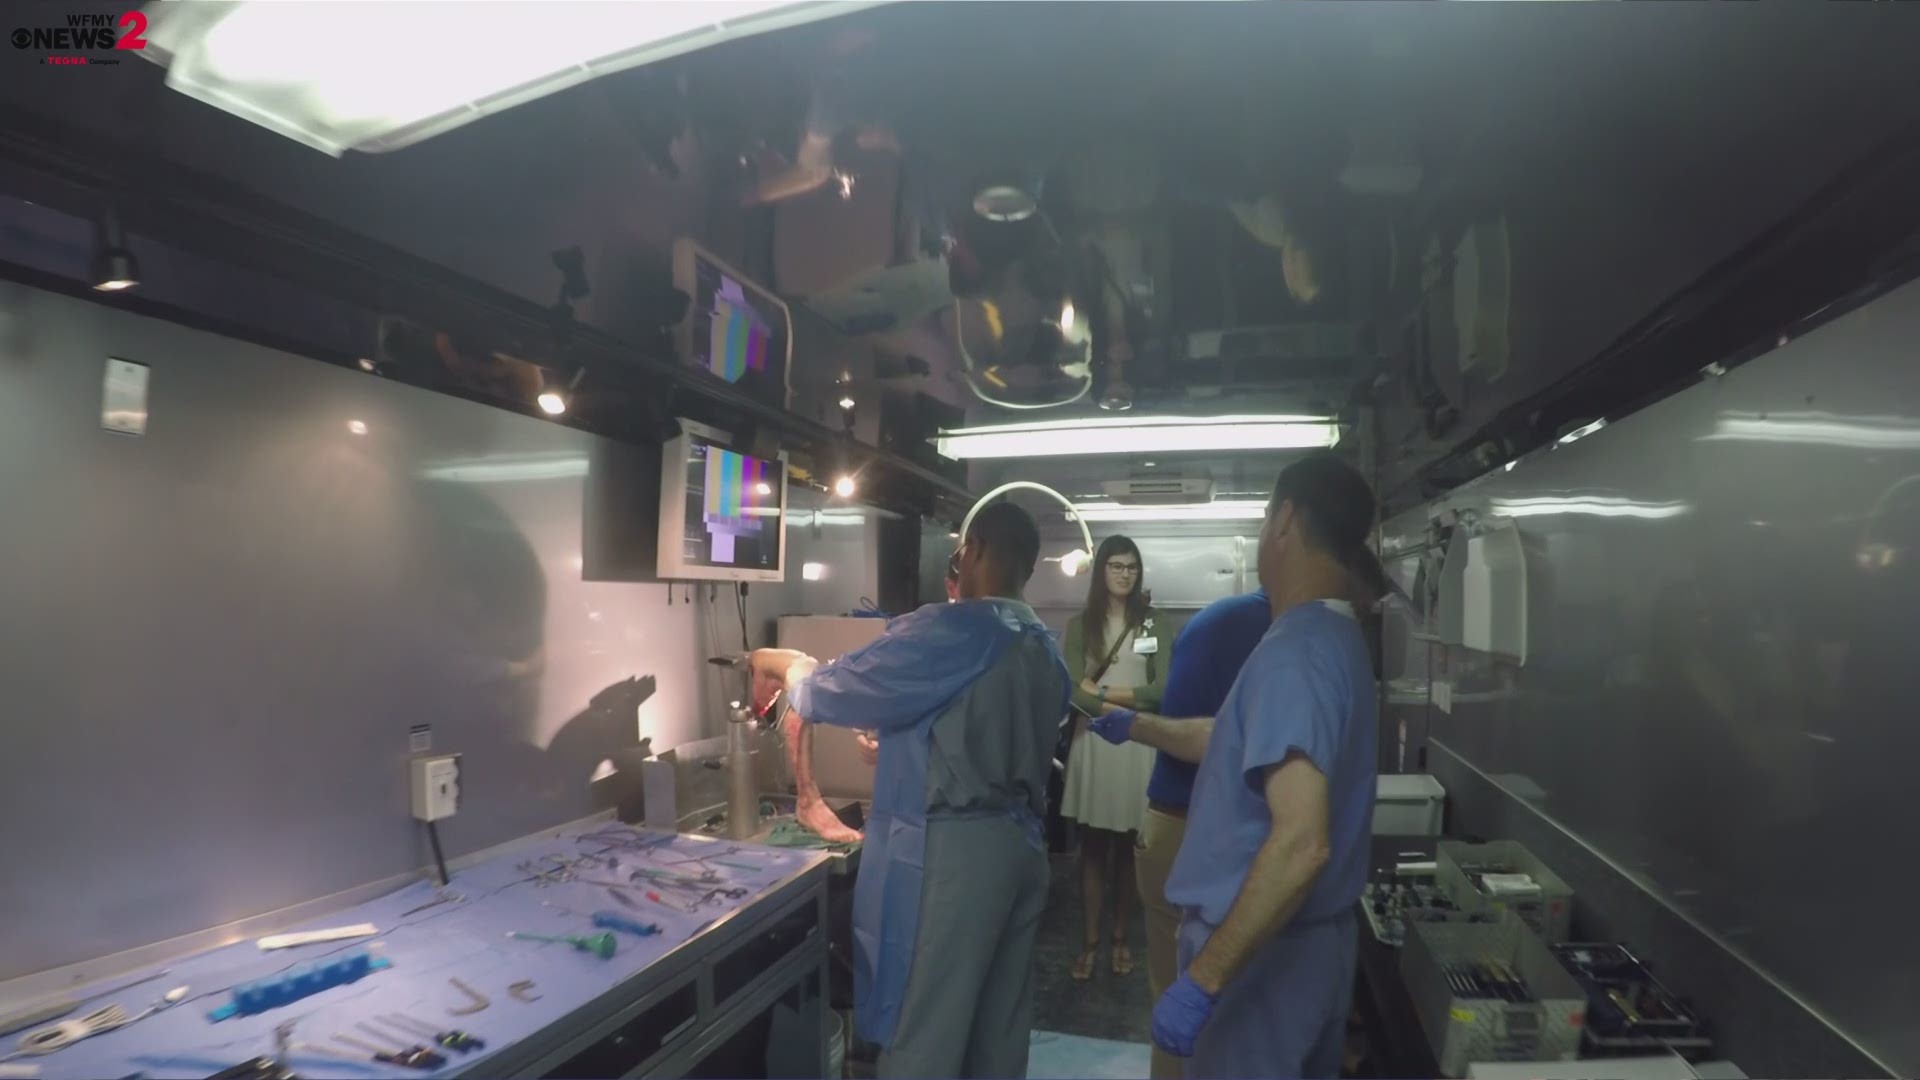 The SouthTech mobile education lab or 'mobile cadaver lab' brings the training and techniques to doctors all around the country.